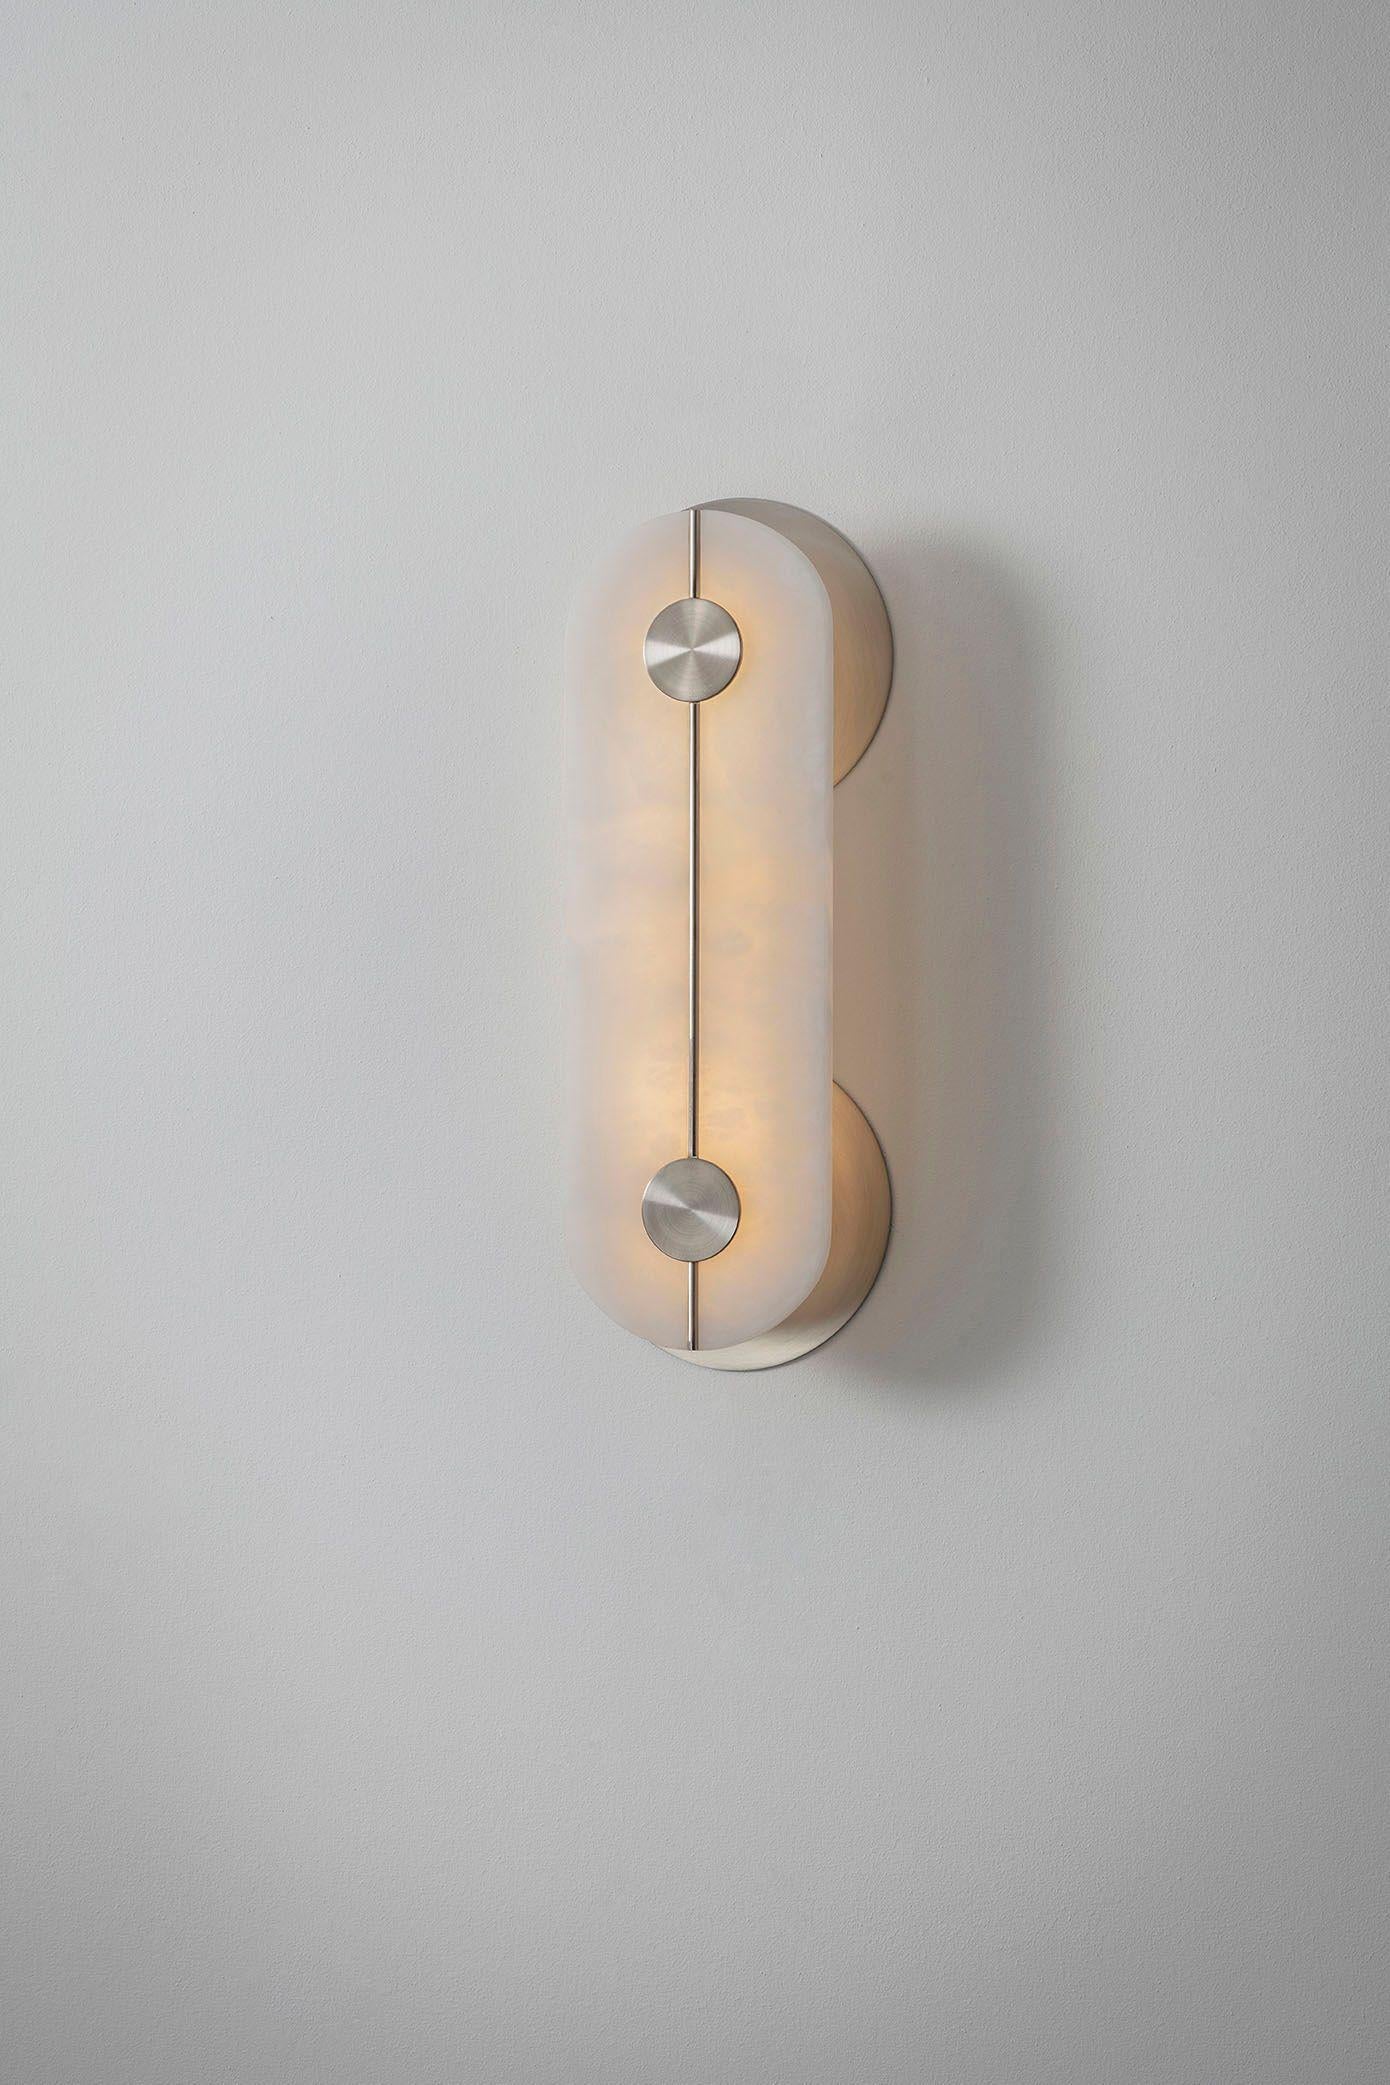 Brace wall light nickel small by Bert Frank
Dimensions: 7 x 16 x H 43 cm 
Materials: Nickel, Alabaster


All our lamps can be wired according to each country. If sold to the USA it will be wired for the USA for instance.

When Adam Yeats and